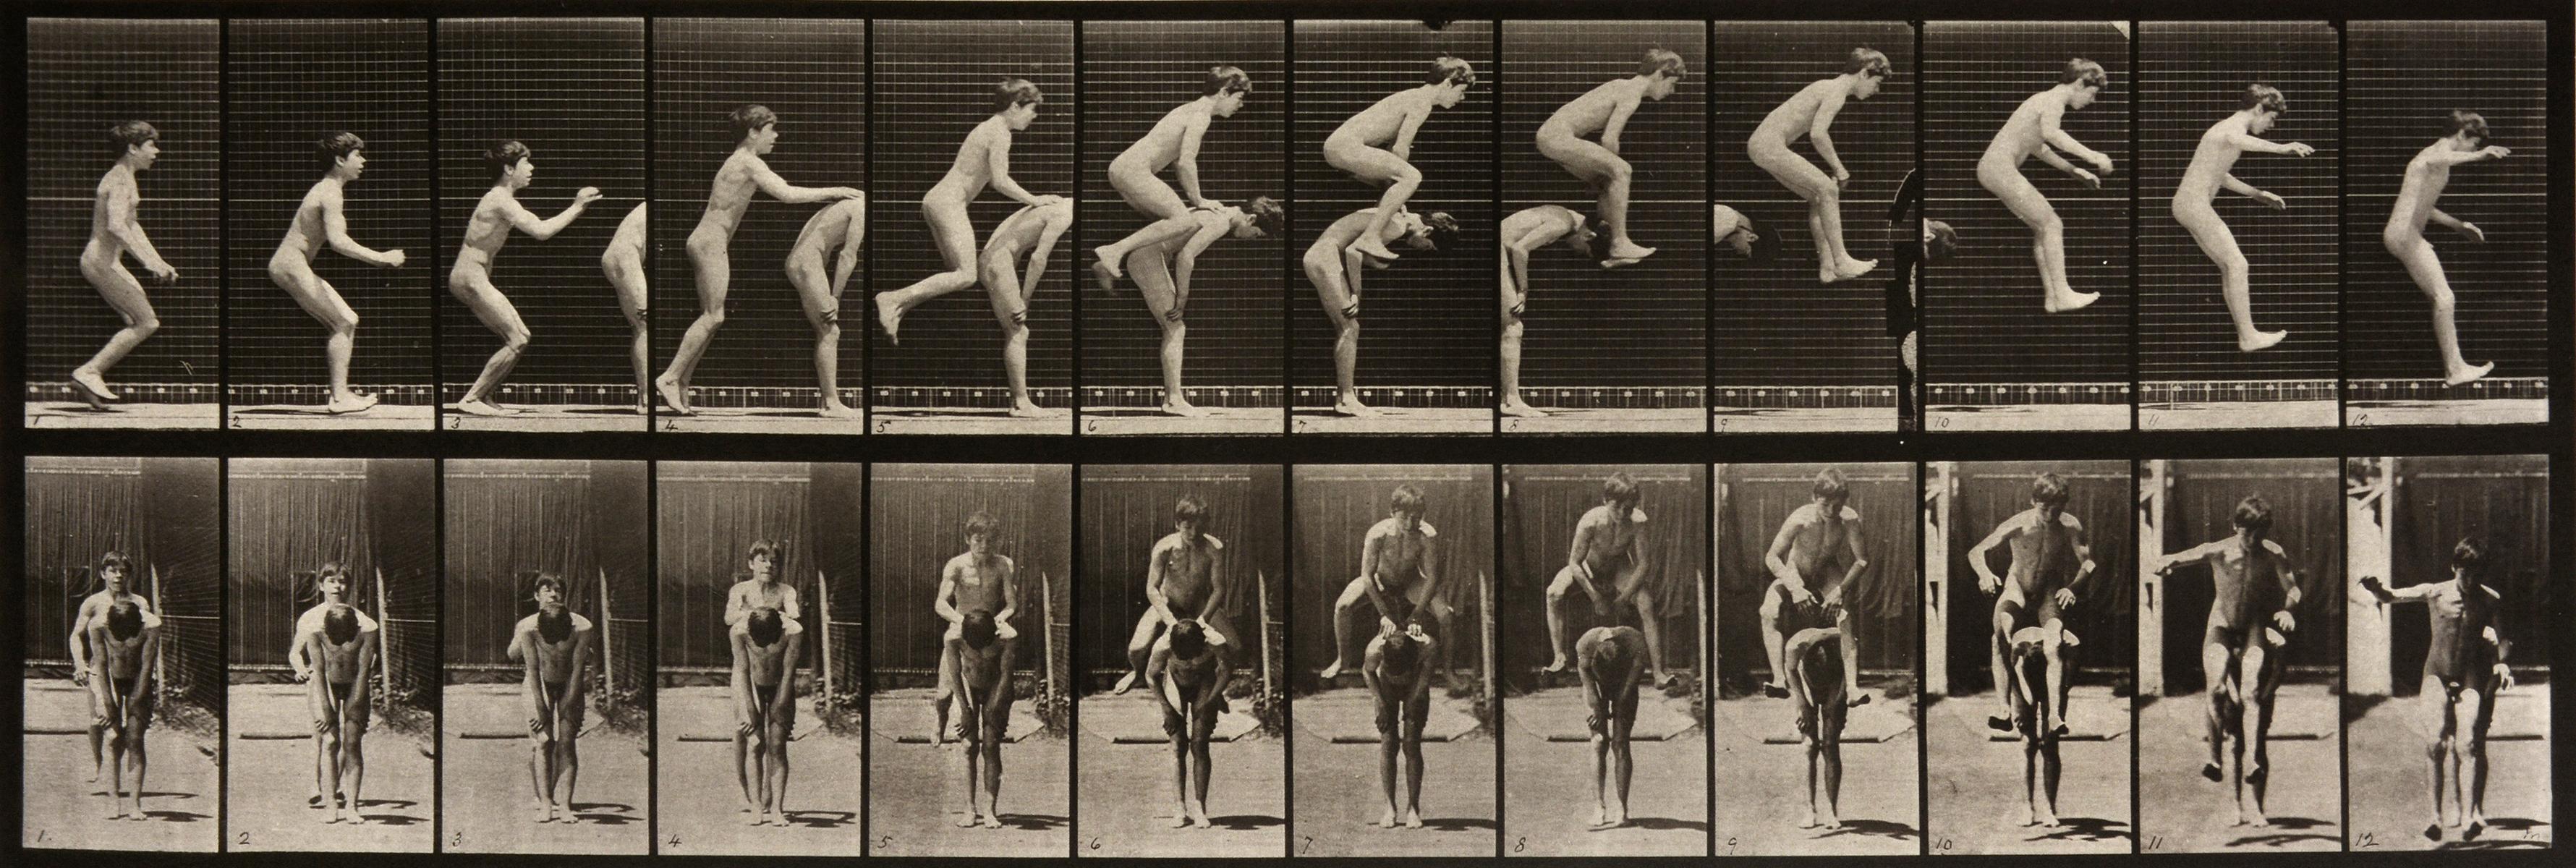 Eadweard Muybridge Black and White Photograph - Animal Locomotion: Plate 168 (Two Boys Performing A Leap Frog), 1887  